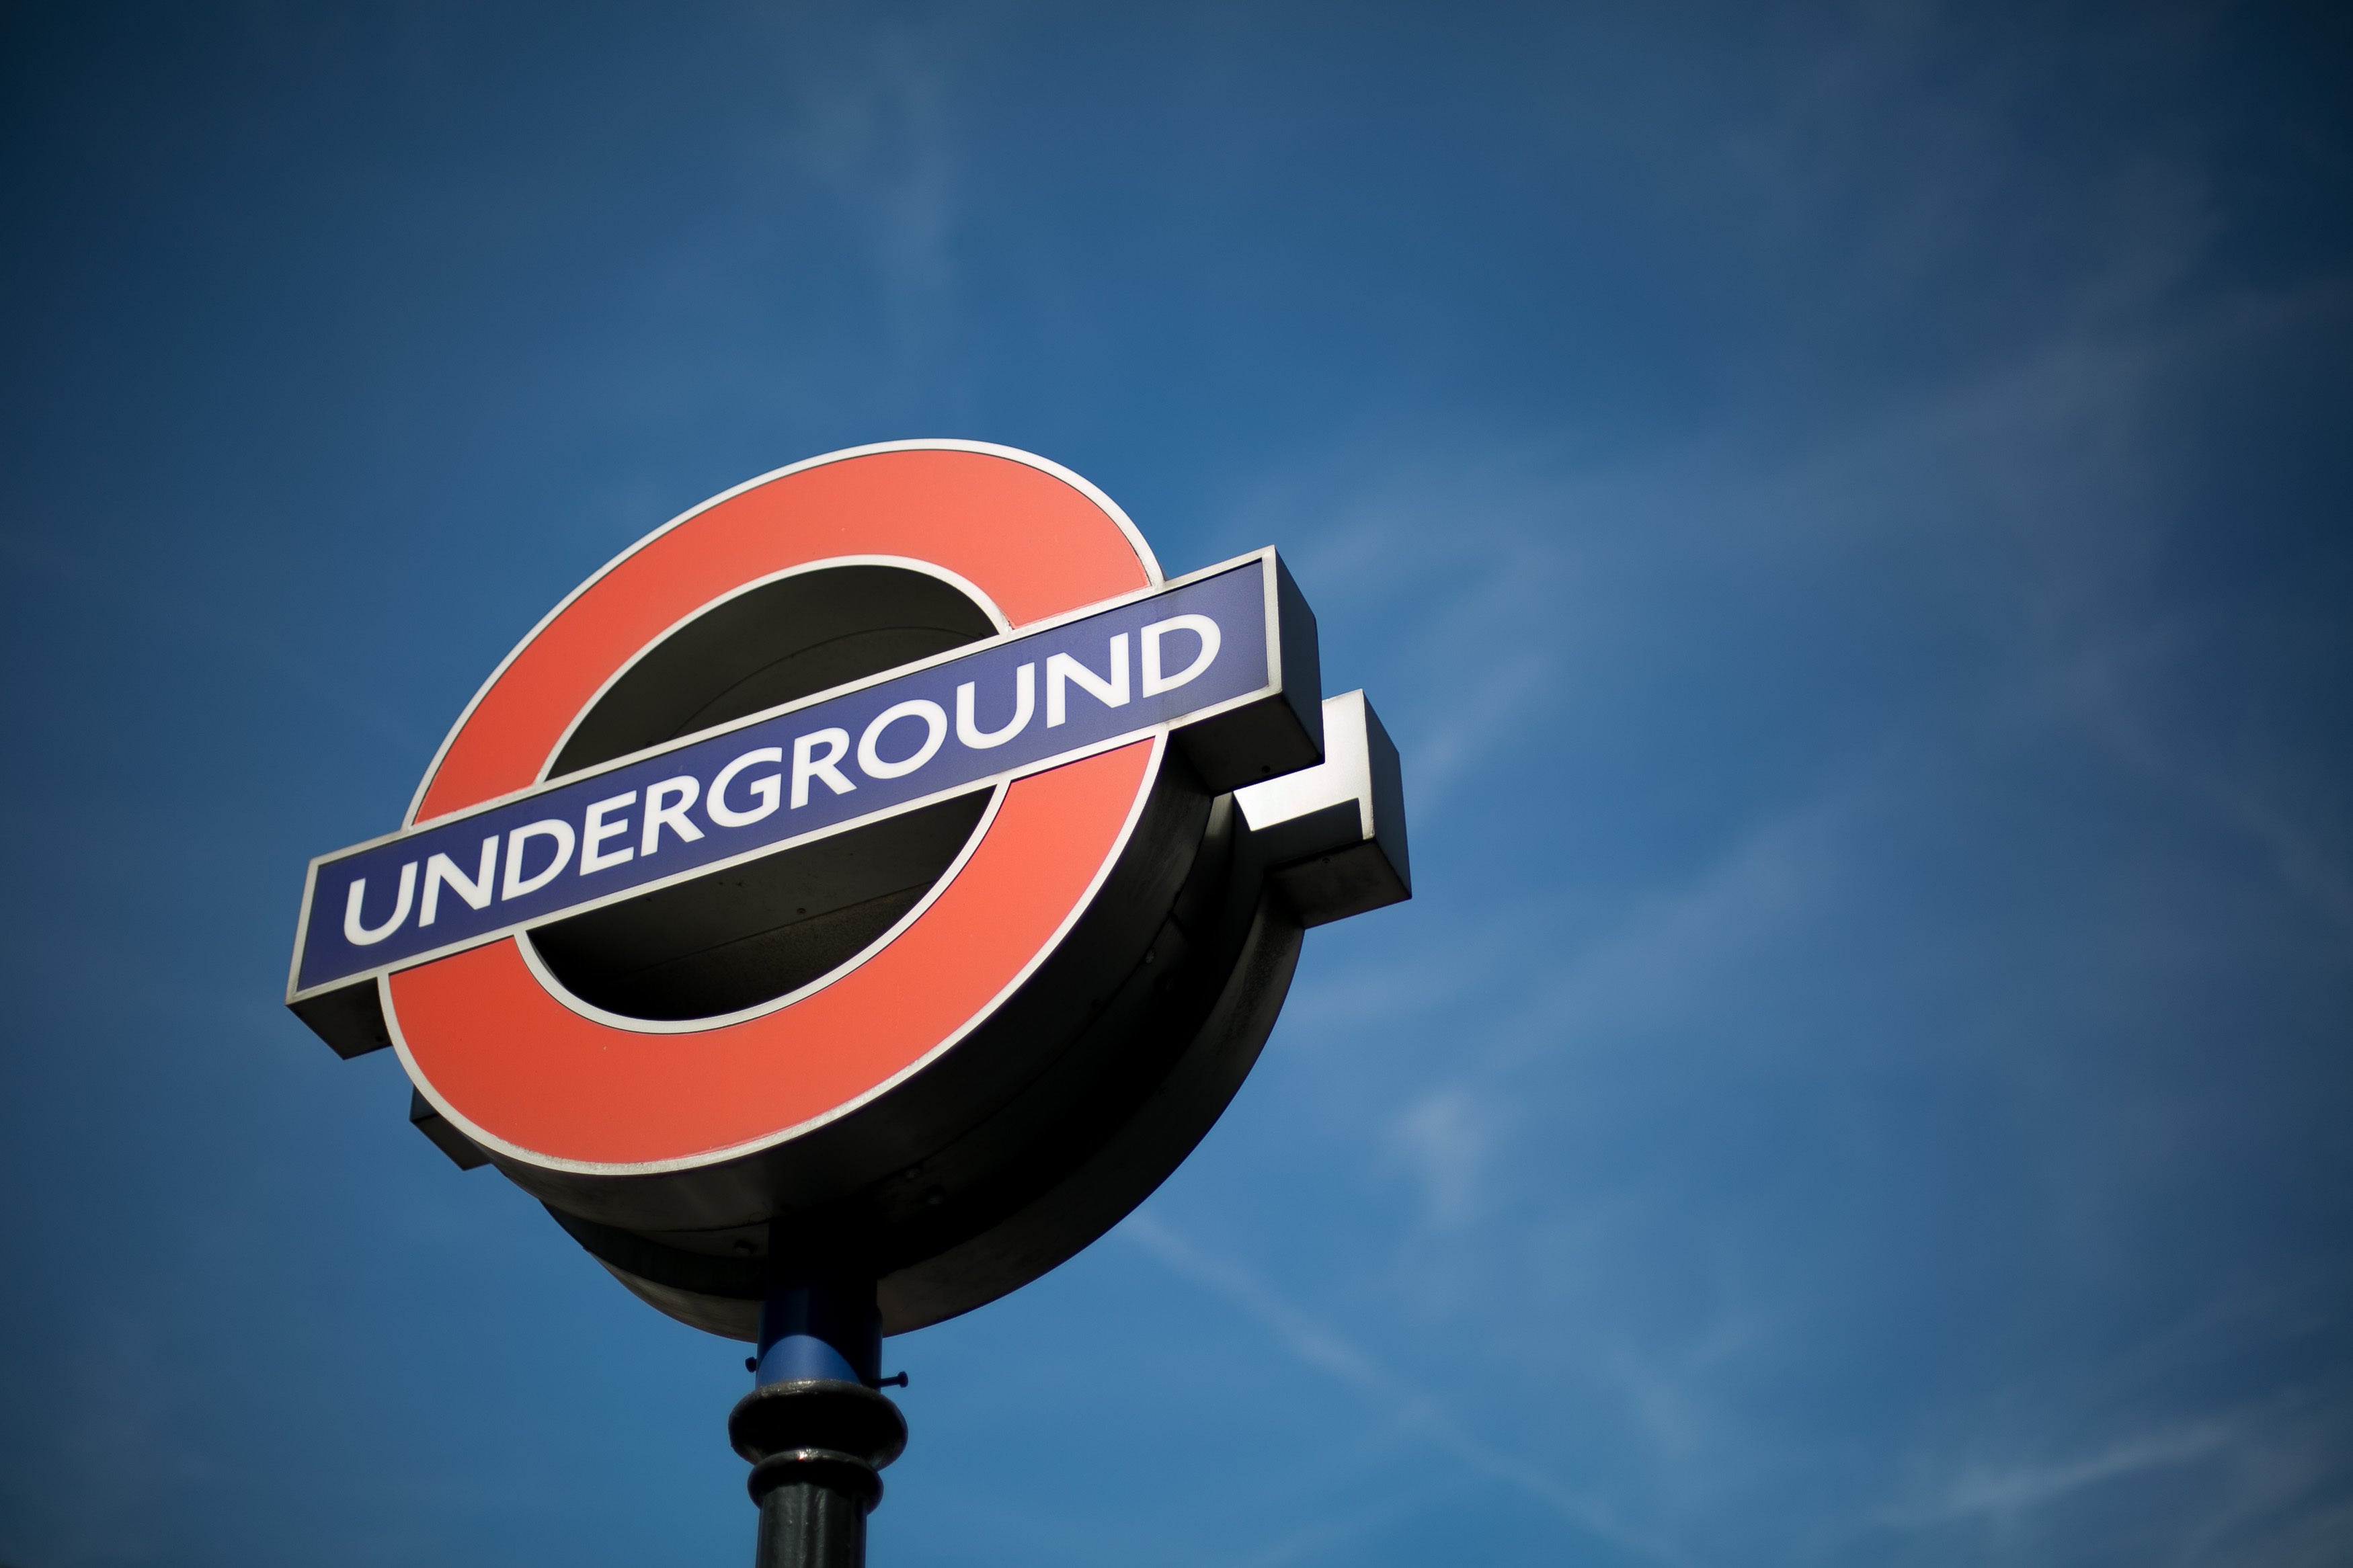 A 24 hour tube strike is in place